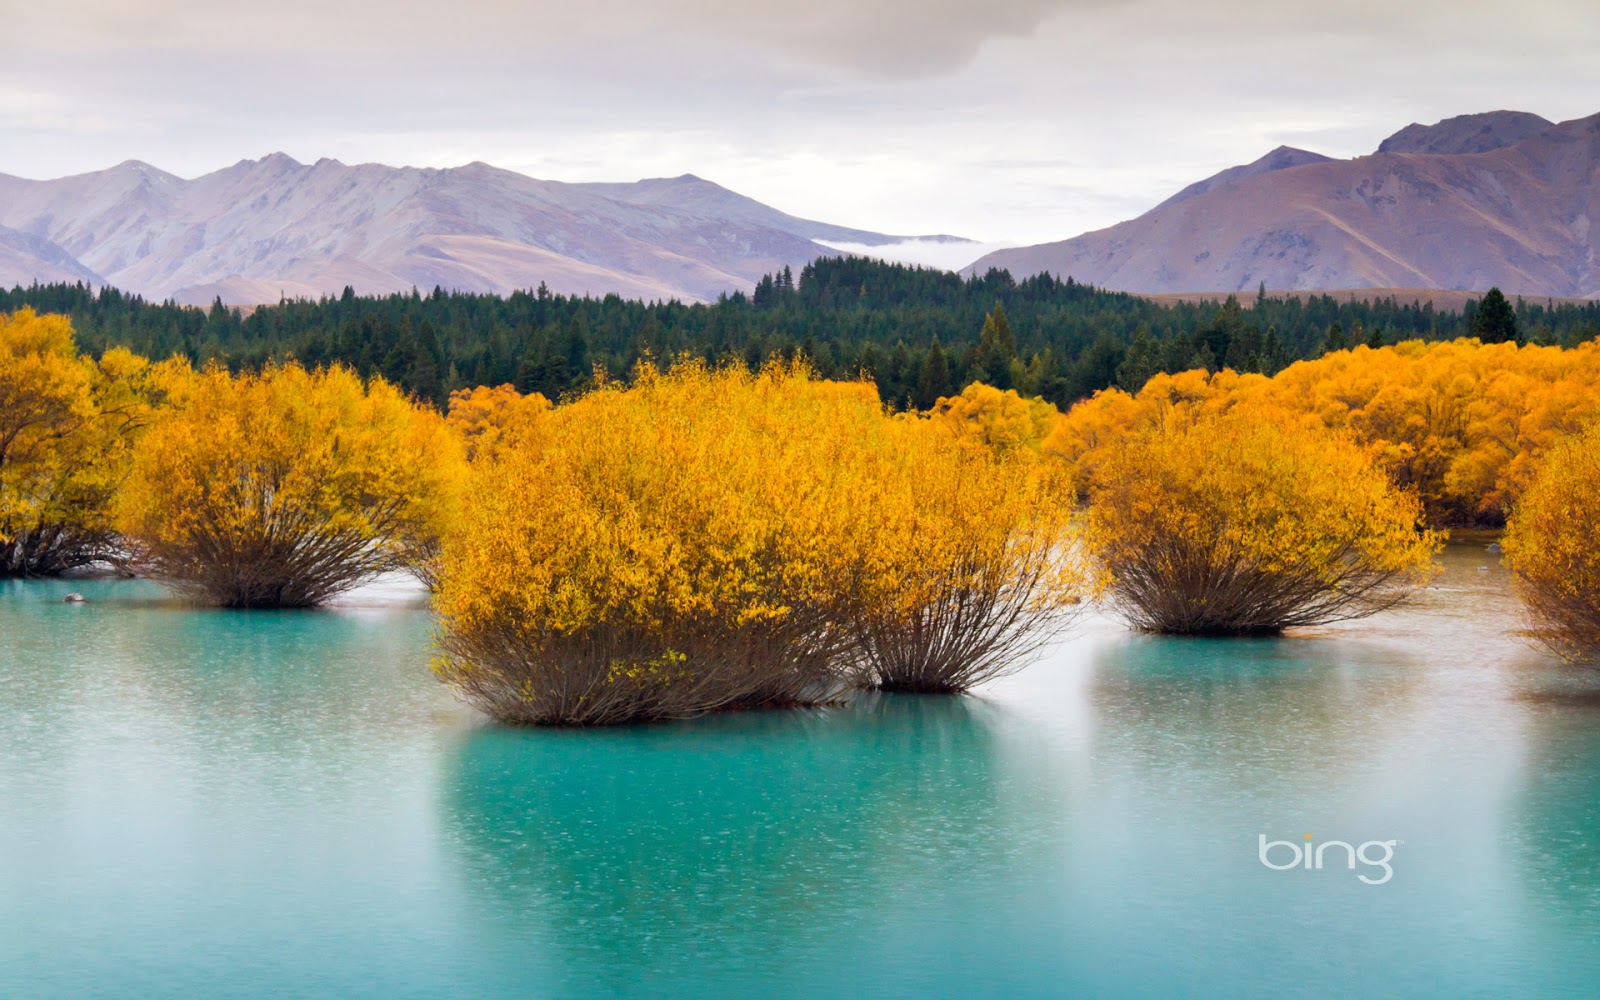 Get a New Bing Wallpaper on Your Android Every Day